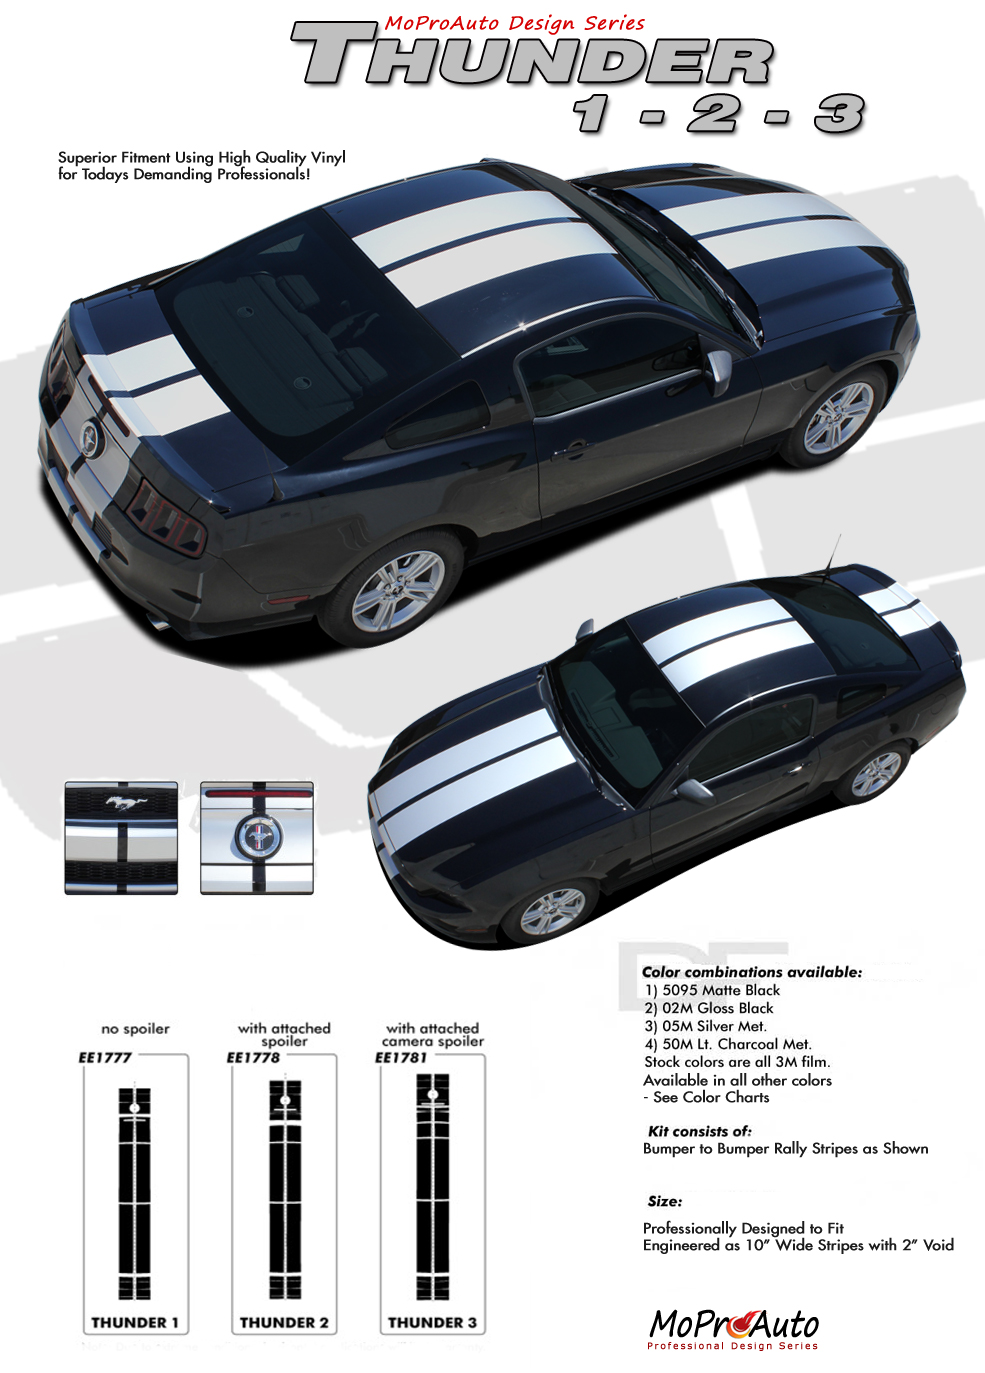 Ford Mustang THUNDER Racing Stripes - MoProAuto Pro Design Series Vinyl Graphics, Stripes and Decals Kit